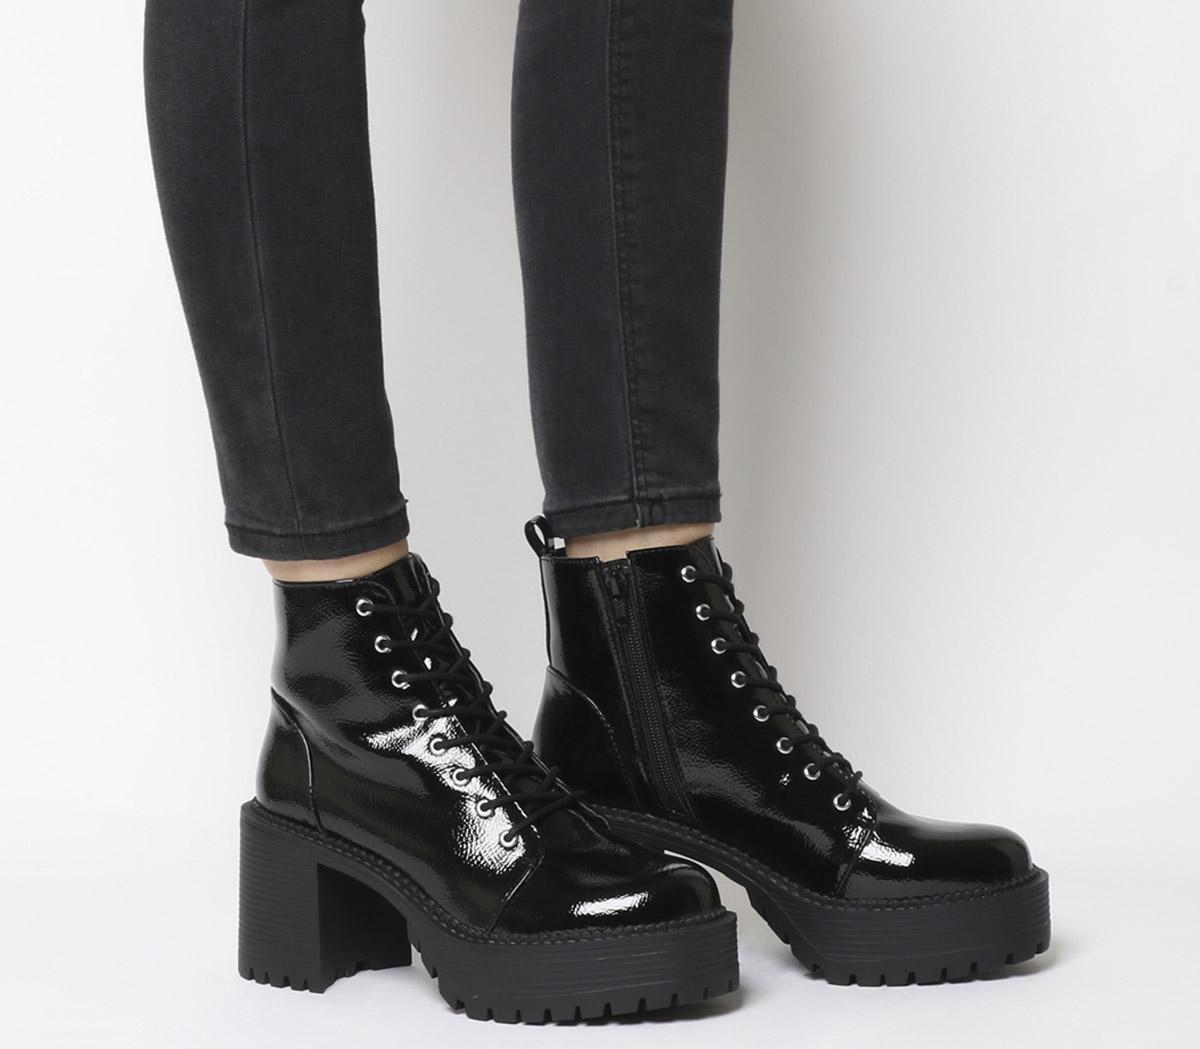 office black patent boots